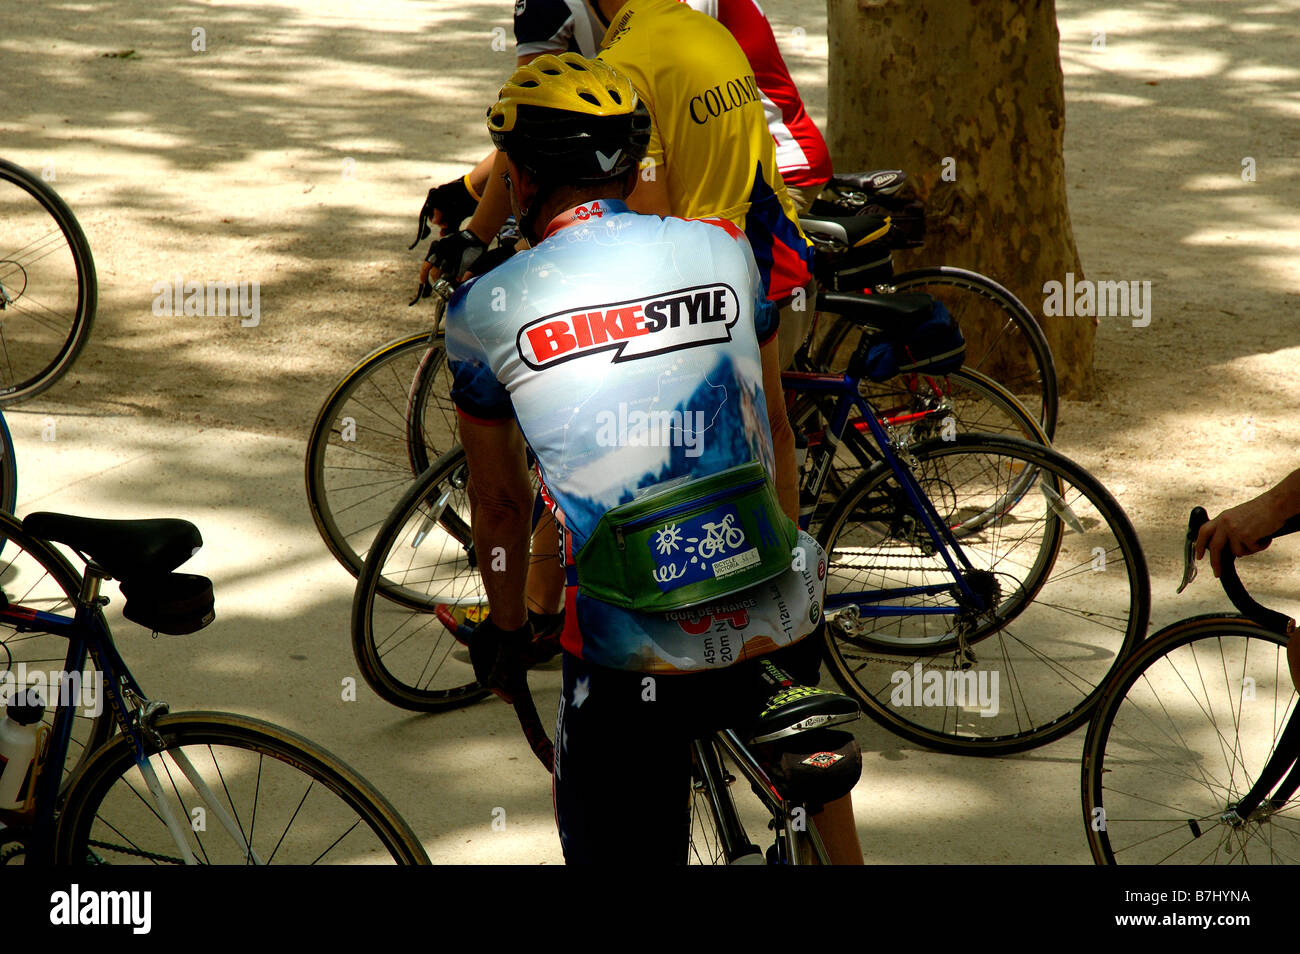 Cyclists resting under the shade of trees, France Stock Photo